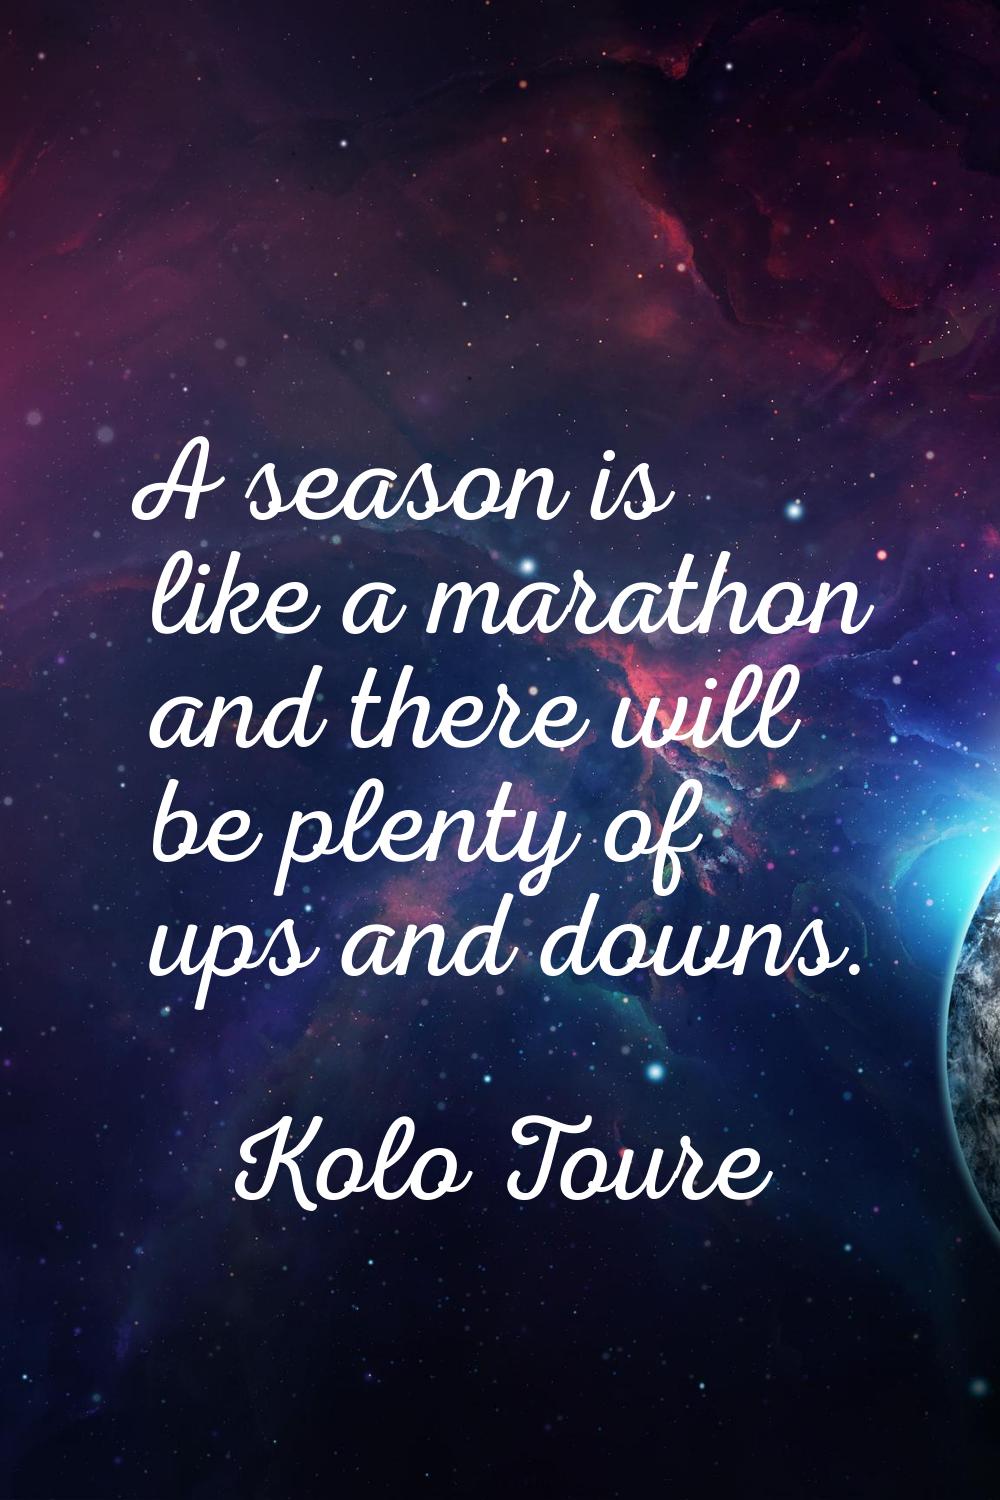 A season is like a marathon and there will be plenty of ups and downs.